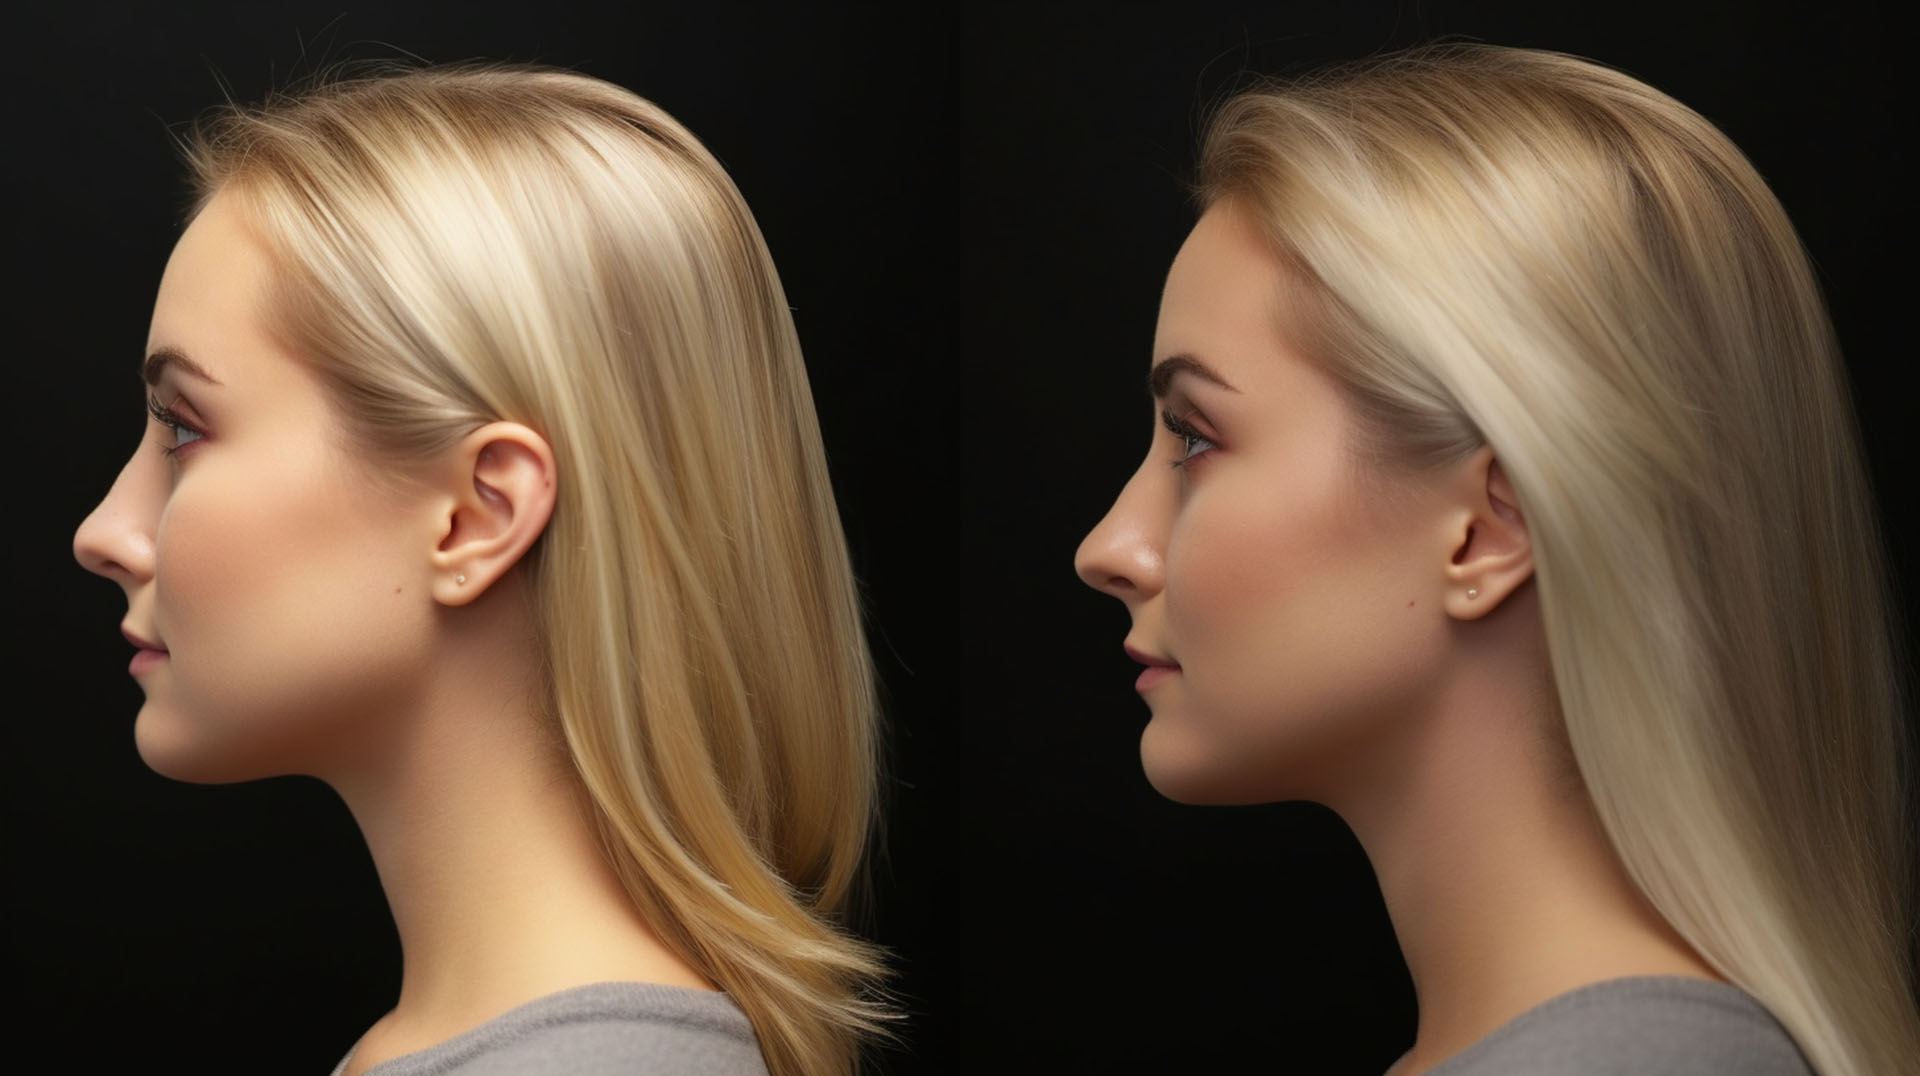 Rhinoplasty Before and After Photo Norfolk County